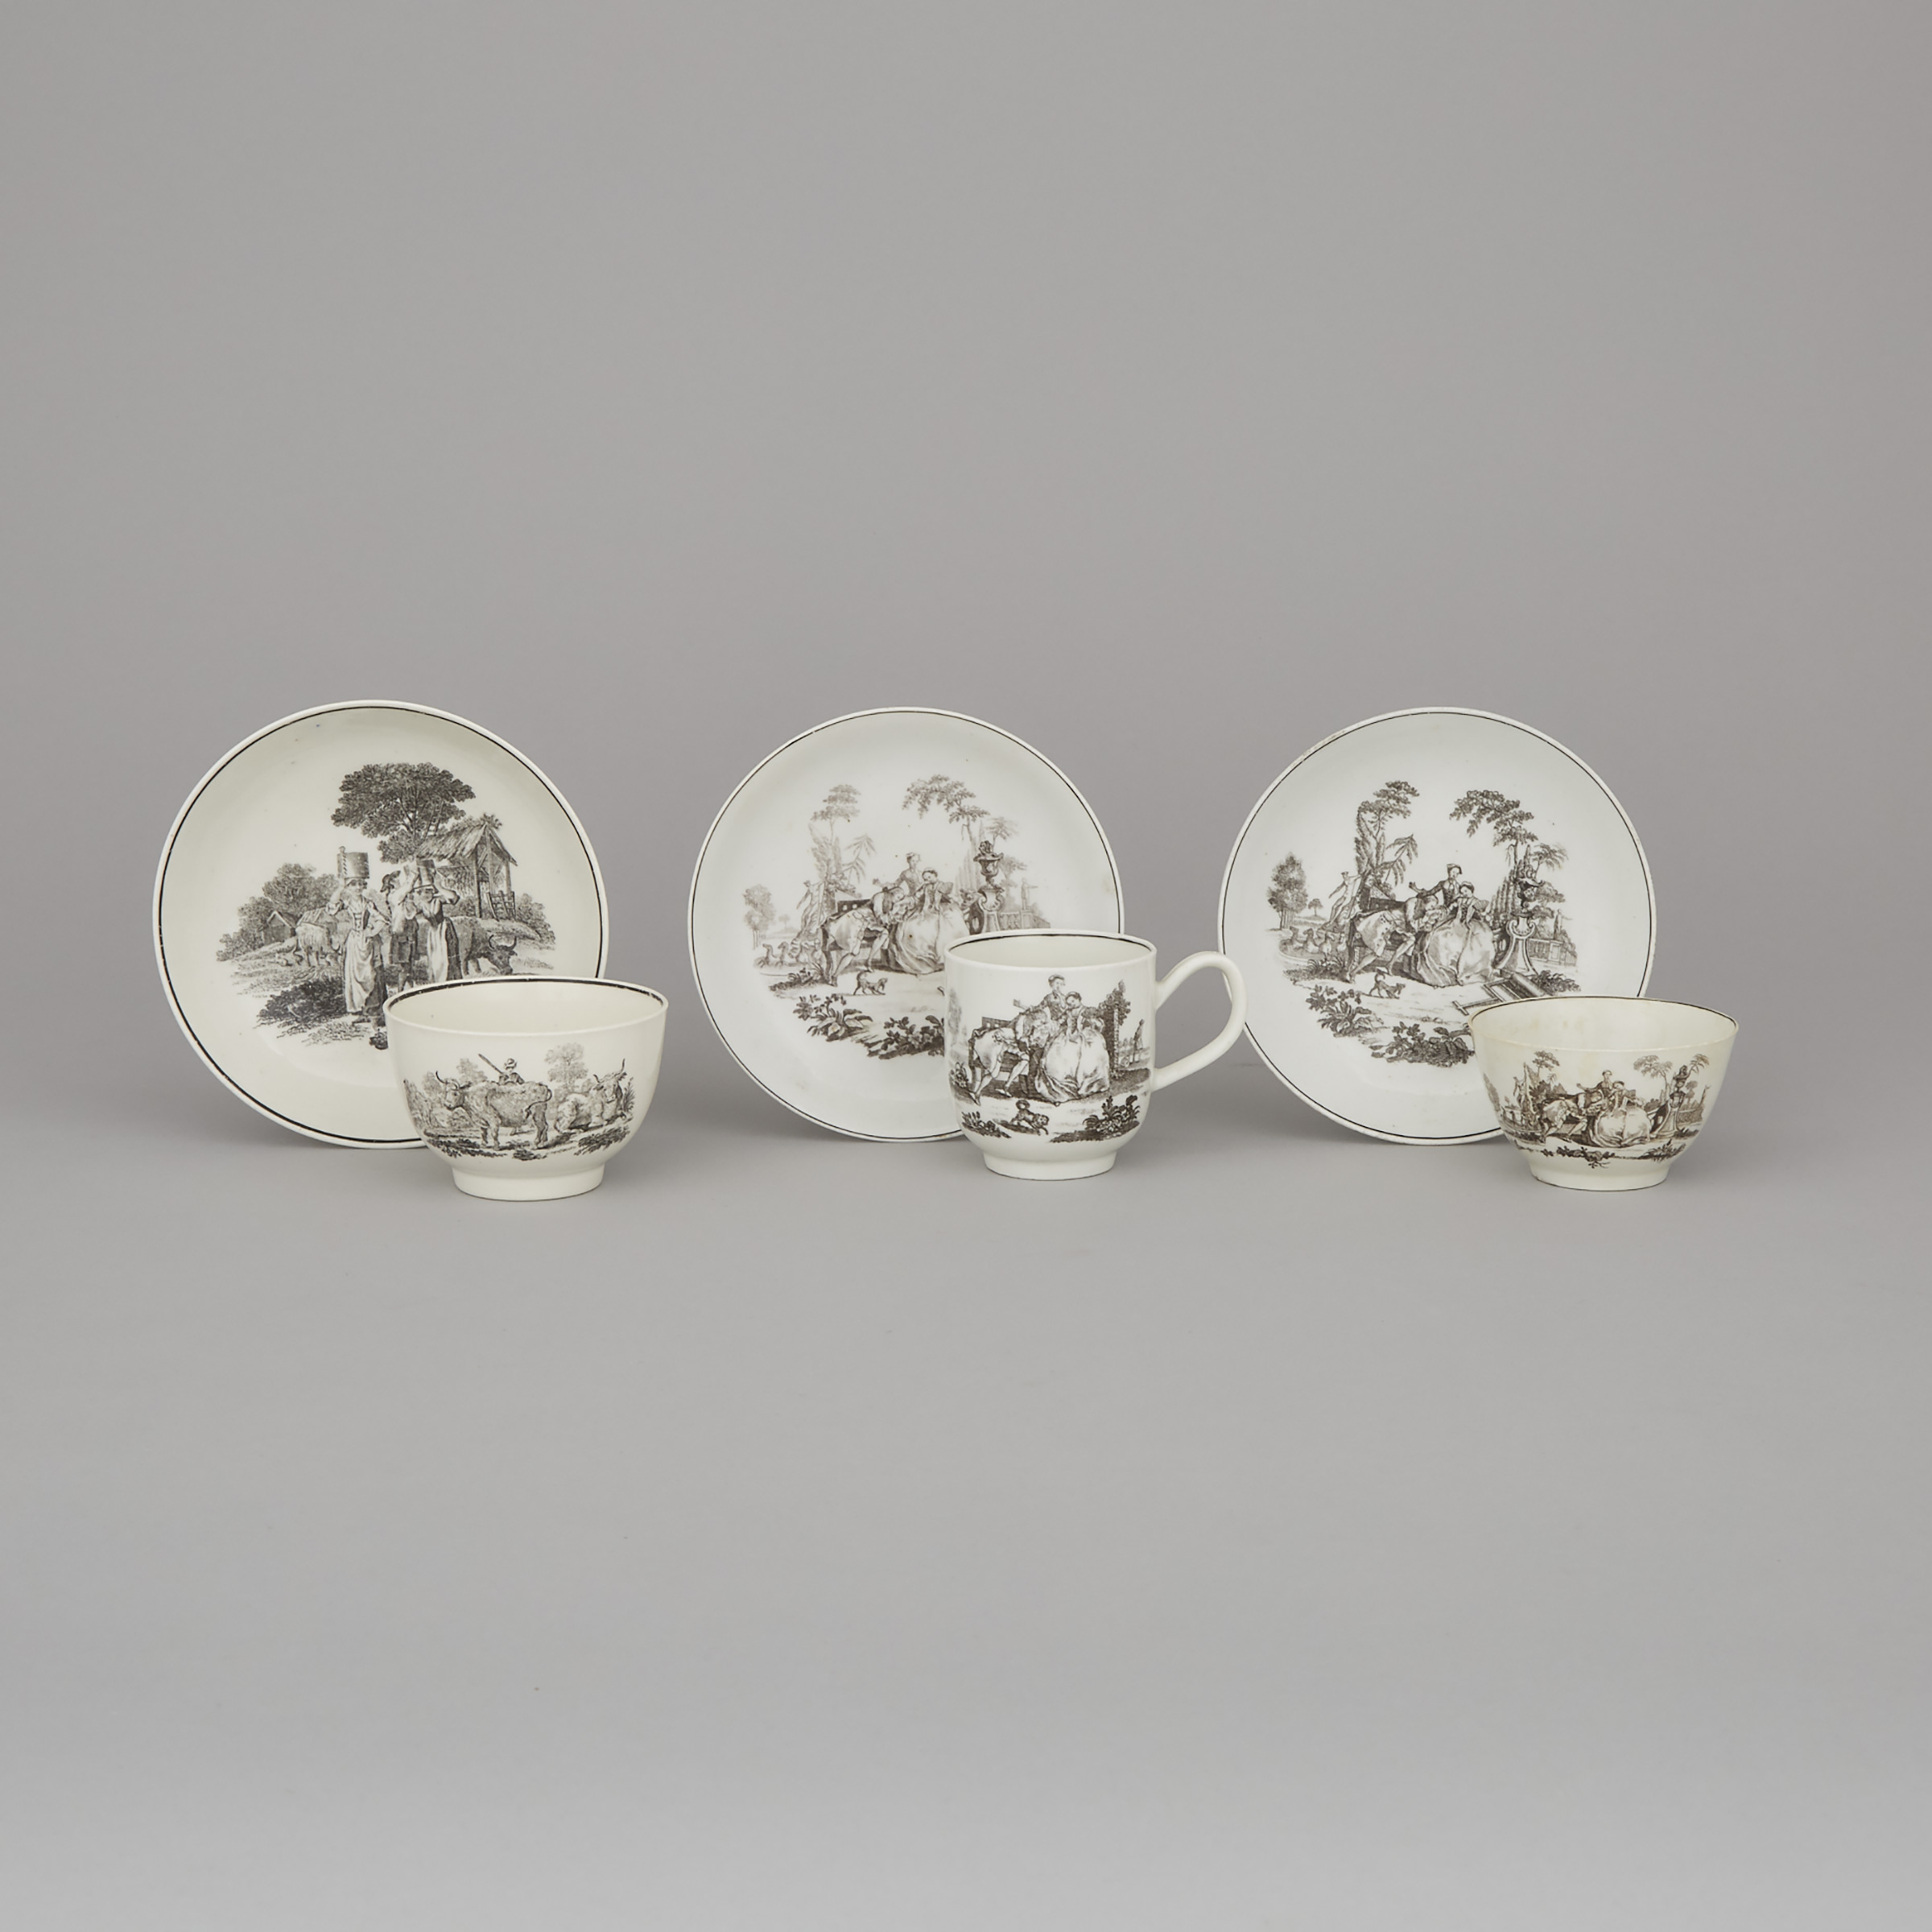 Two Worcester Black Printed 'L'Amour' and 'Milkmaids' Pattern Tea Bowls and a 'L'Amour' Coffee Cup with Saucers, Robert Hancock, c.1760